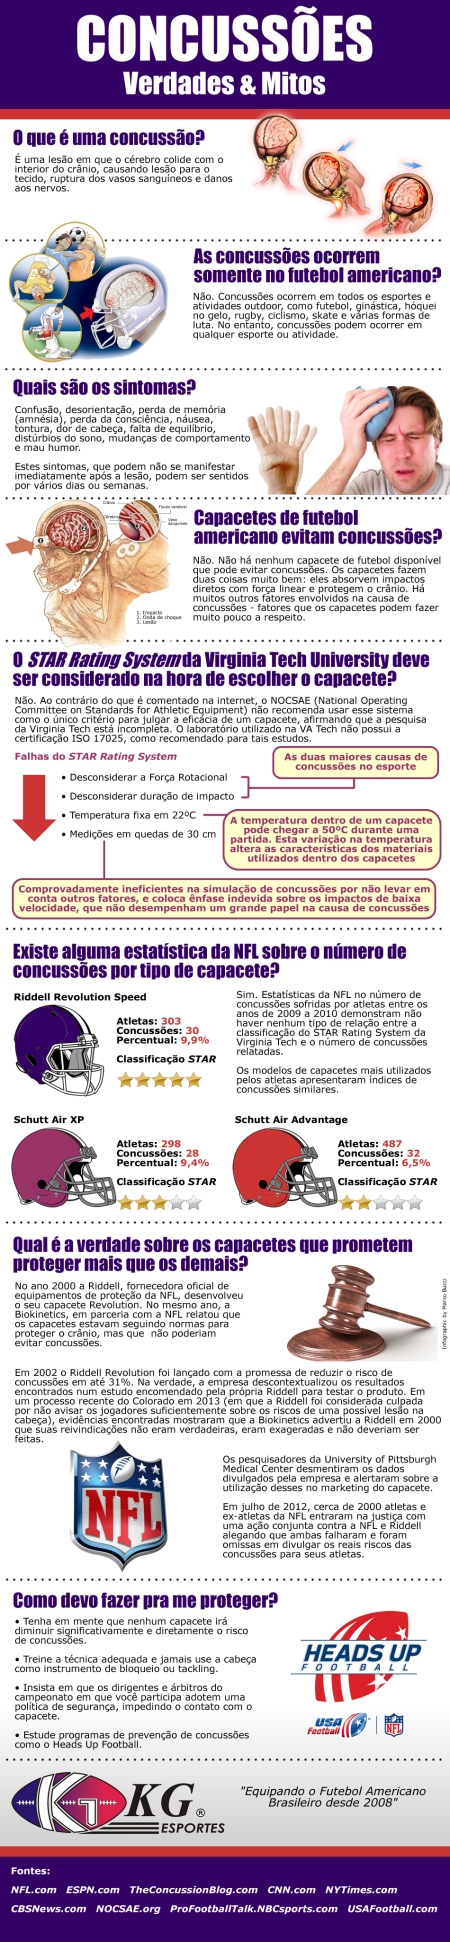 infographic_concussions_2.0